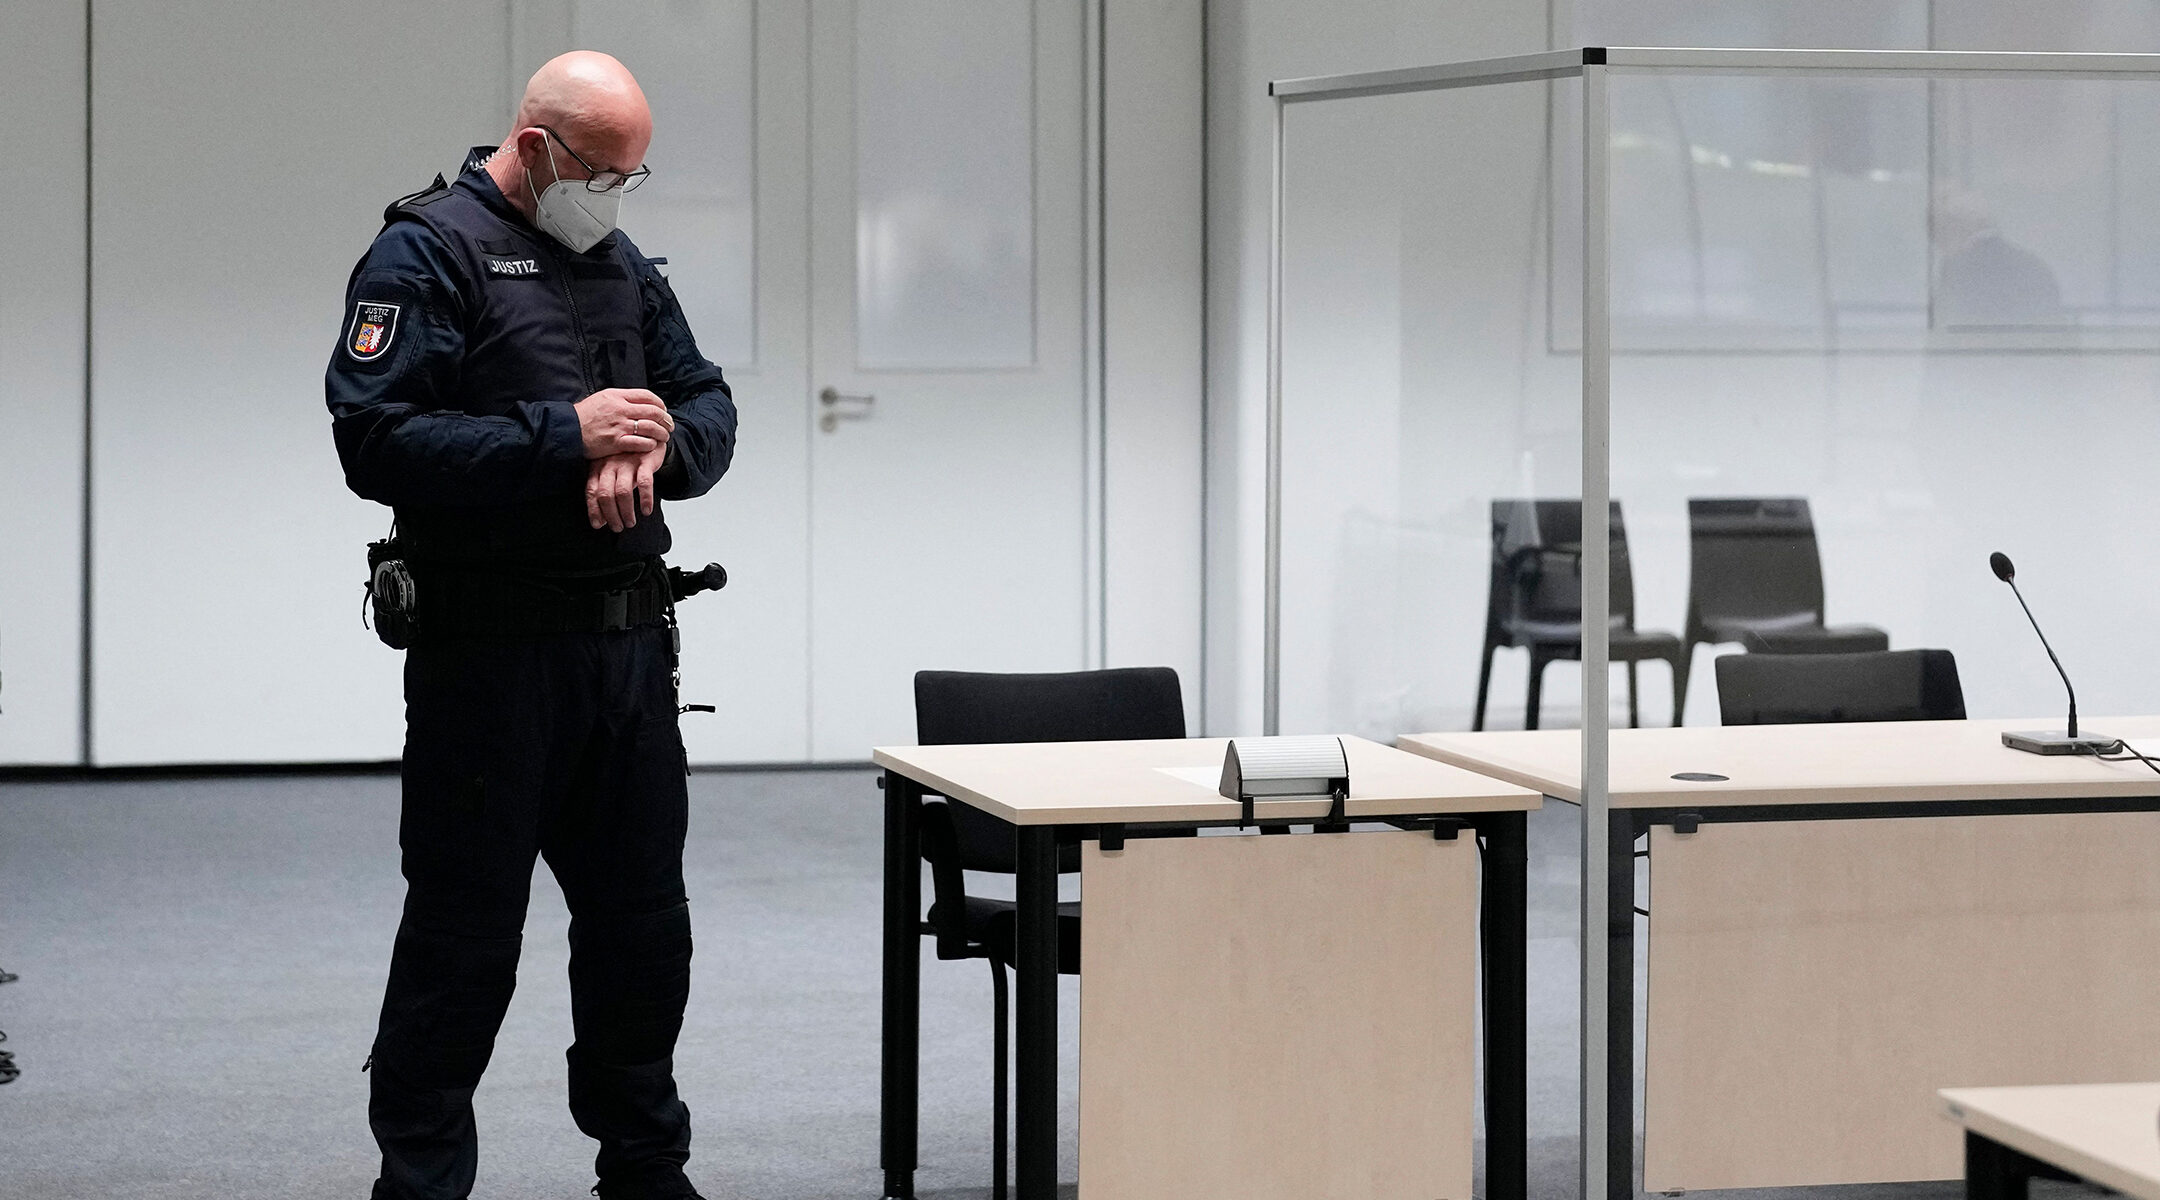 A judicial officer looks at his watch prior to a trial against 96-year-old alleged war criminal Irmgard Furchner in Itzehoe, Germany, on Sept. 30, 2021. (Markus Schreiber/Pool/AFP via Getty Images)